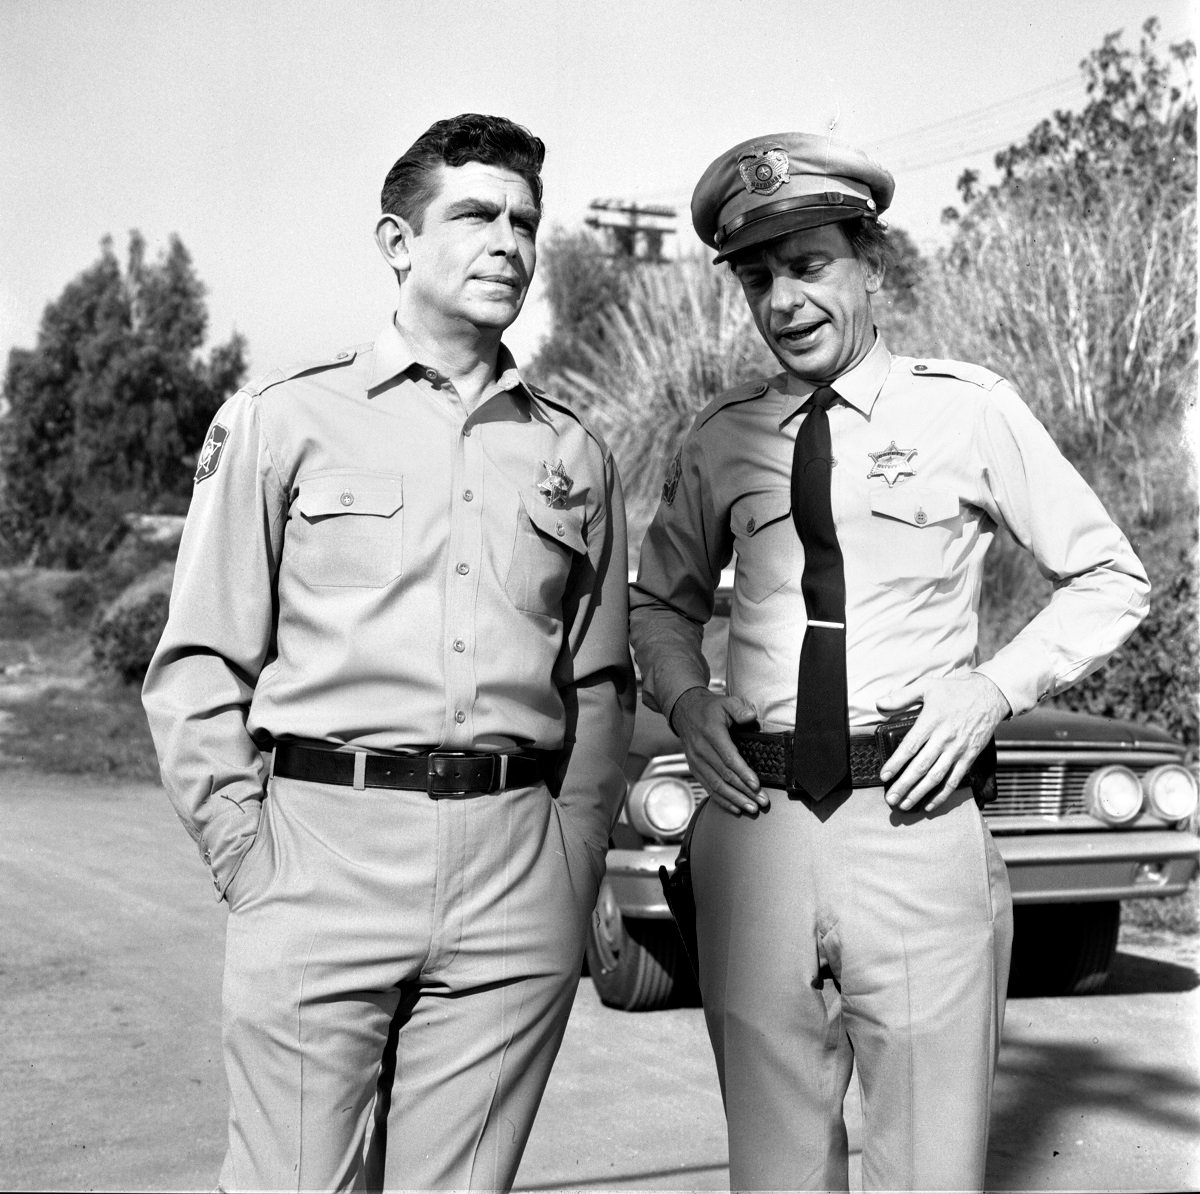 Andy Taylor and Barney Fife stand together in Mayberry